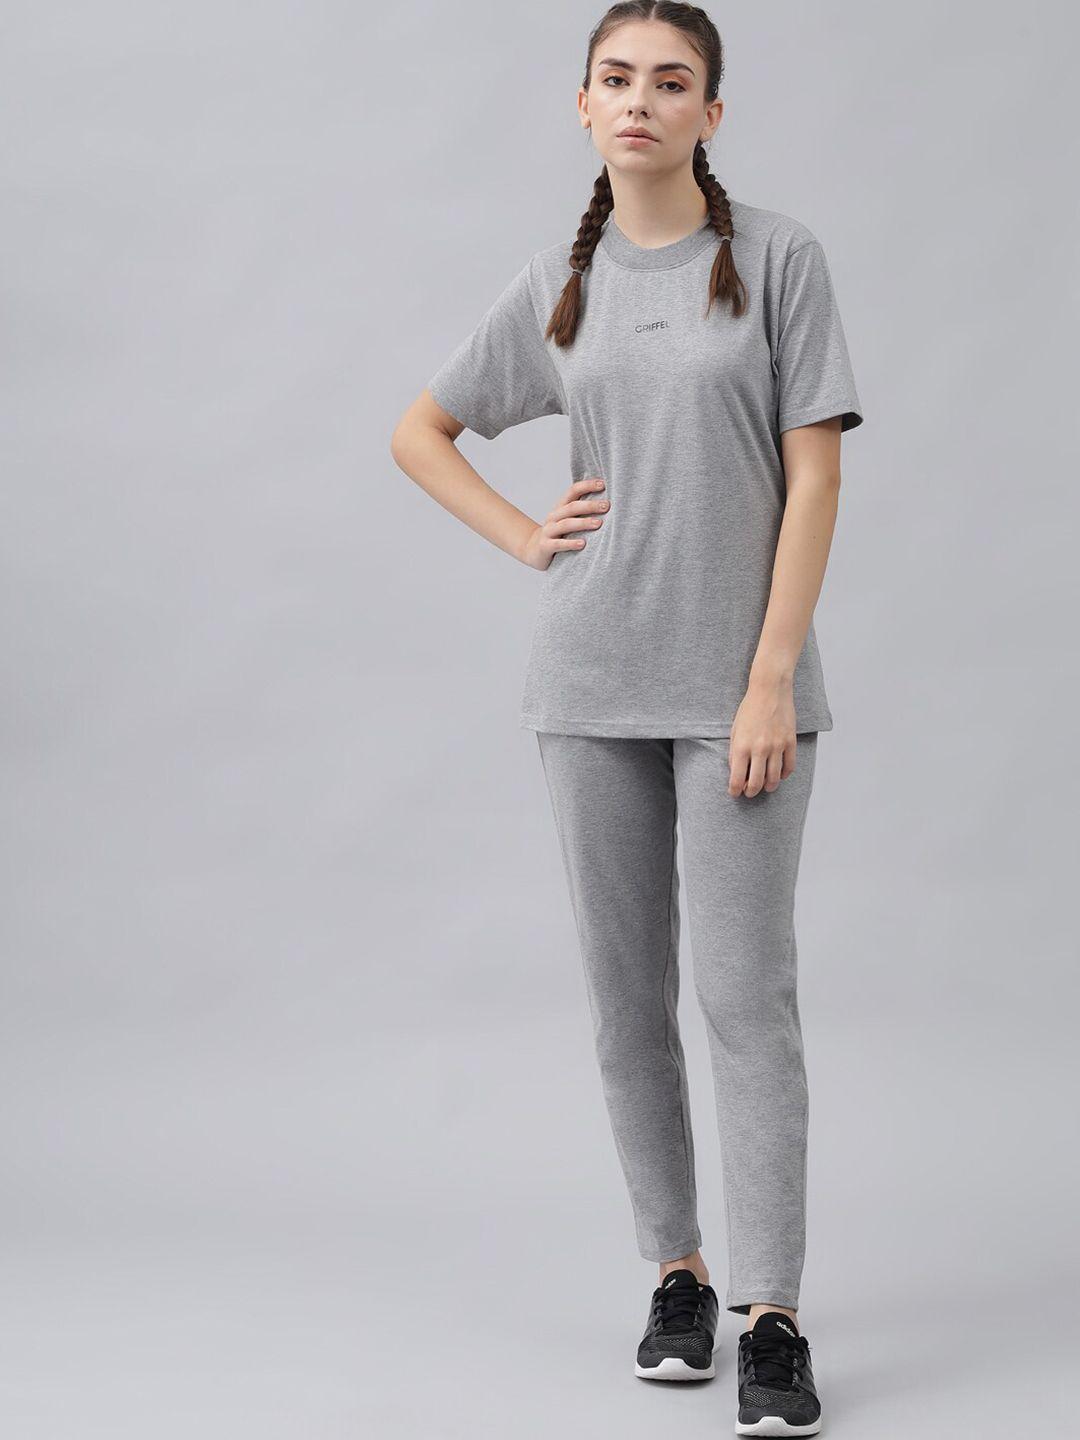 griffel women pure cotton t-shirt with track pants